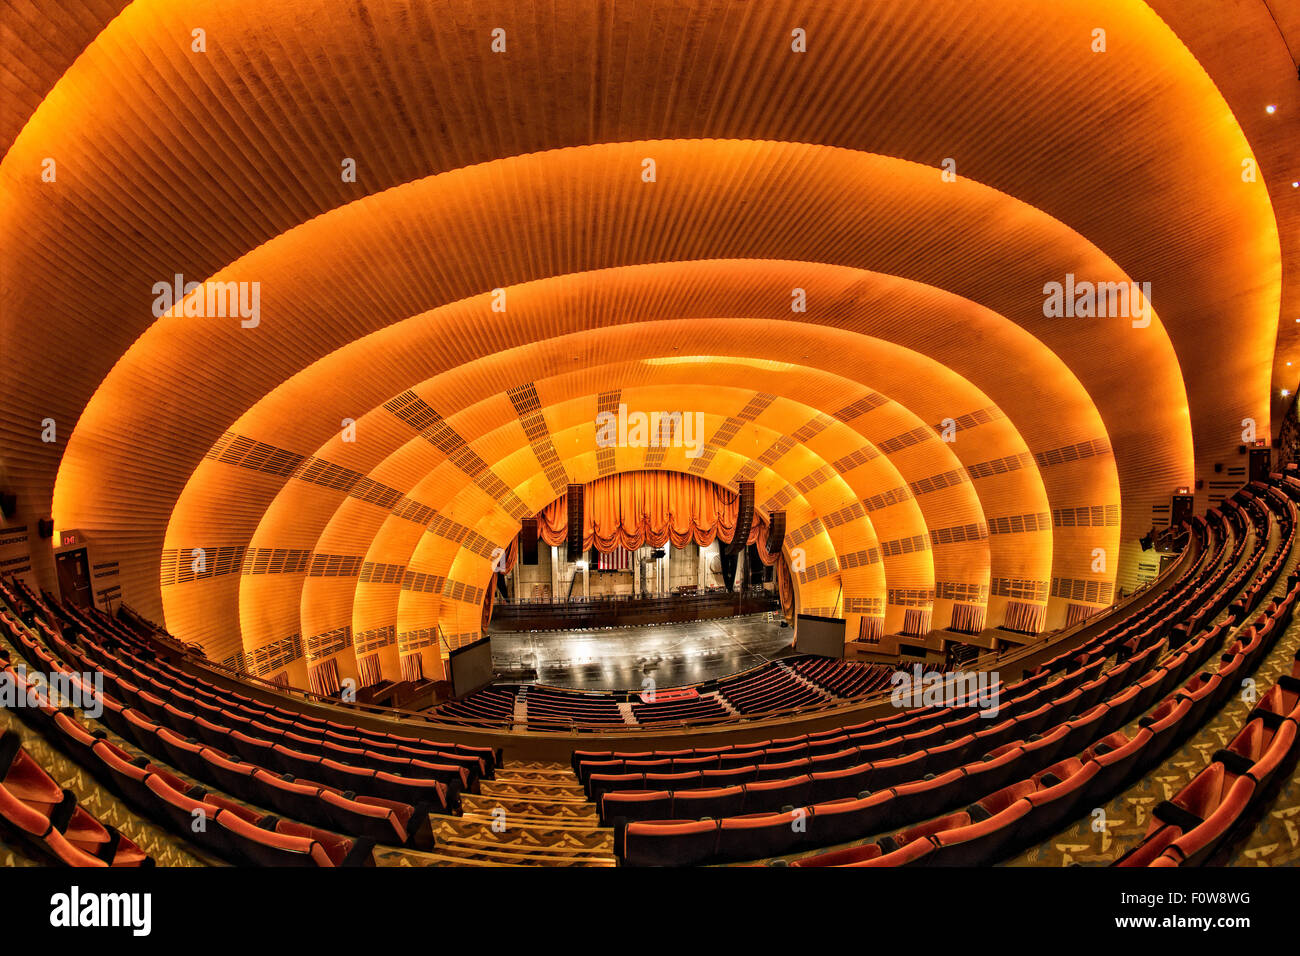 Radio City Music Hall - Interior view to the art deco architectural details of the iconic landmark Radio City Music Hall Theatre in the theatre district of midtown Manhattan in New York City, New York. Stock Photo